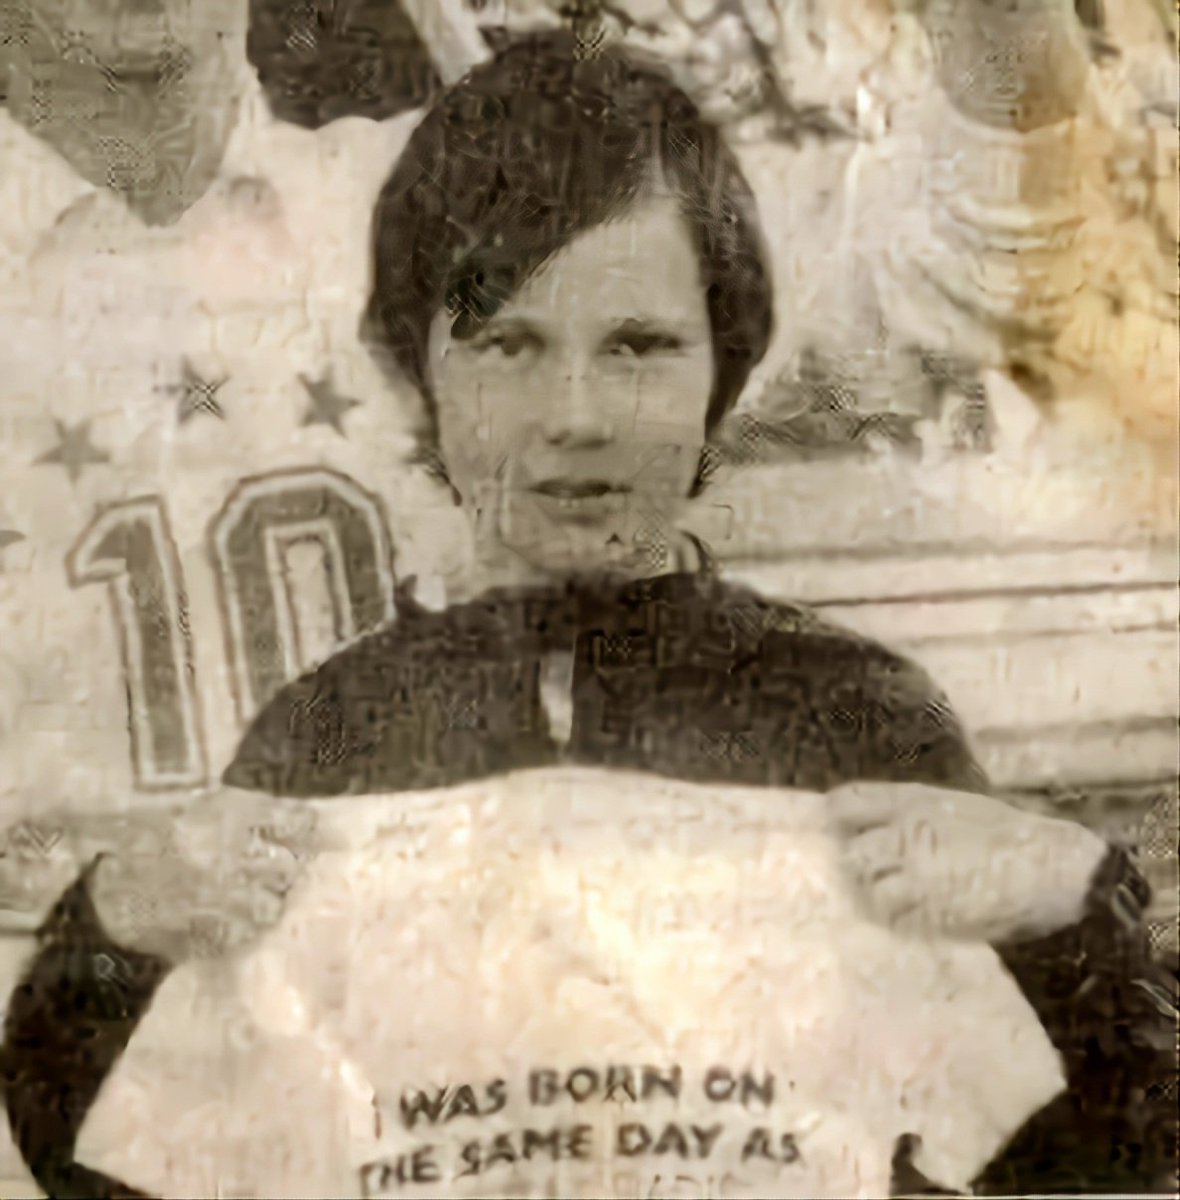 OK the only thing I got from 1983 of me is this. From the Staines & Egham news. I was invited to the Capital Radio 10th birthday party in Hyde Park as I was born the day the station started. I got a free T-Shirt #TOTP1983